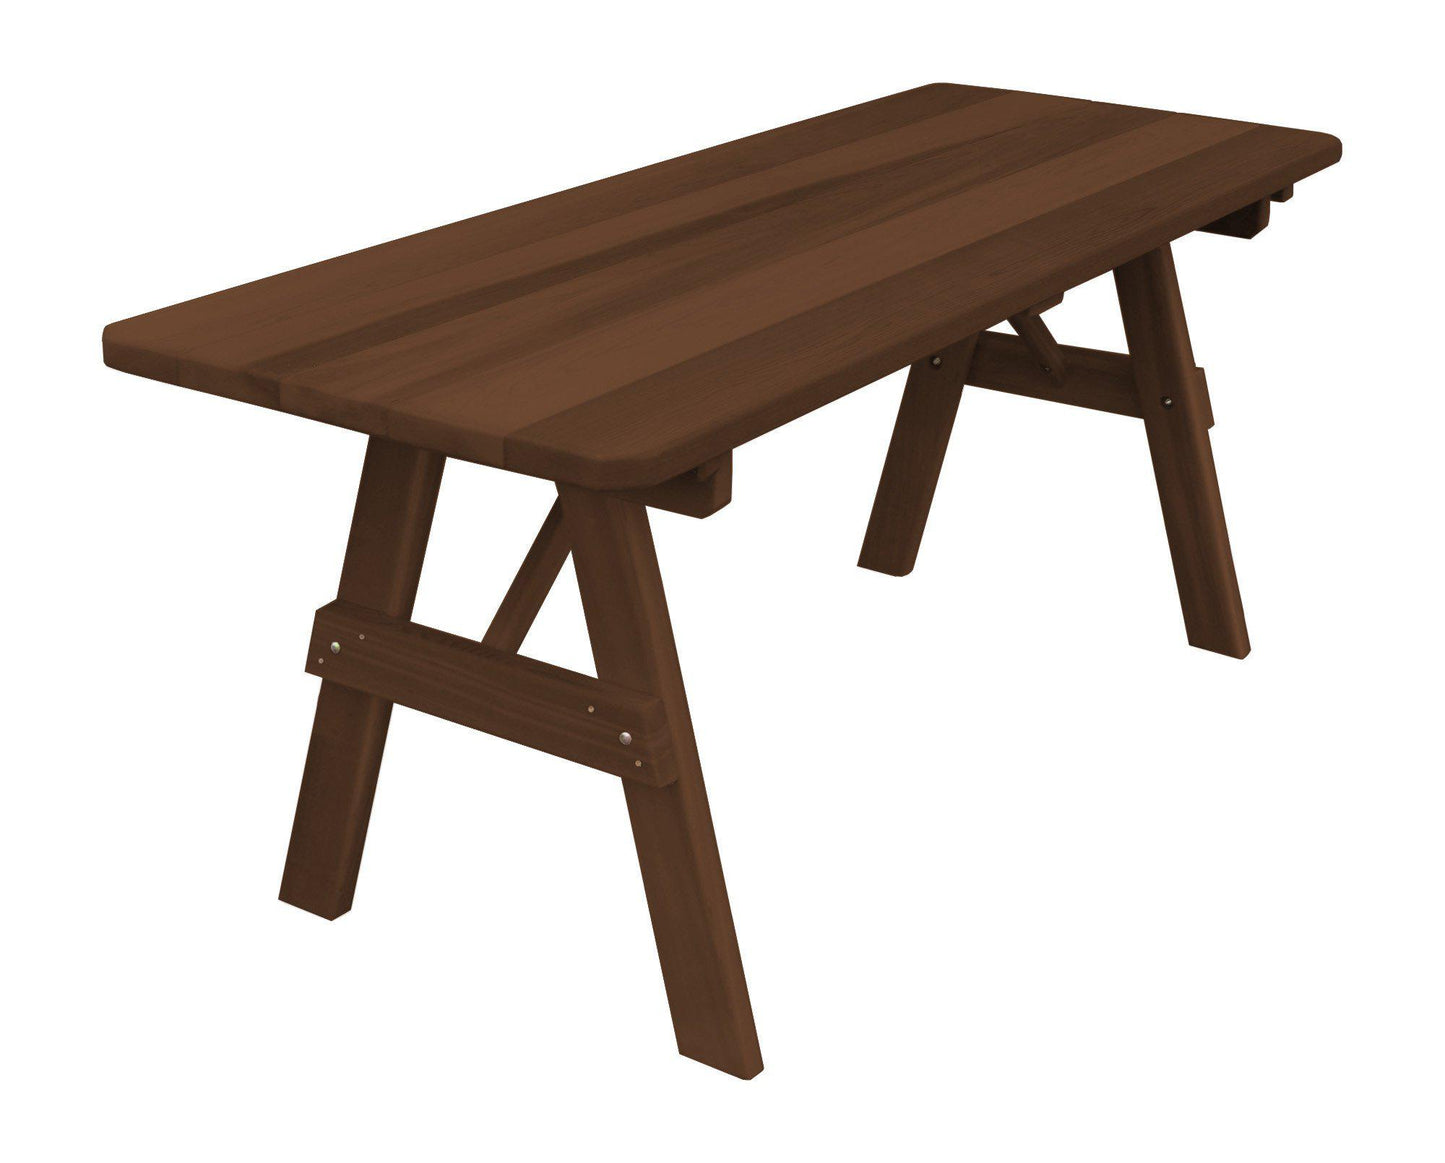 A&L FURNITURE CO. Western Red Cedar 94" Traditional Table Only - Specify for FREE 2" Umbrella Hole - LEAD TIME TO SHIP 2 WEEKS